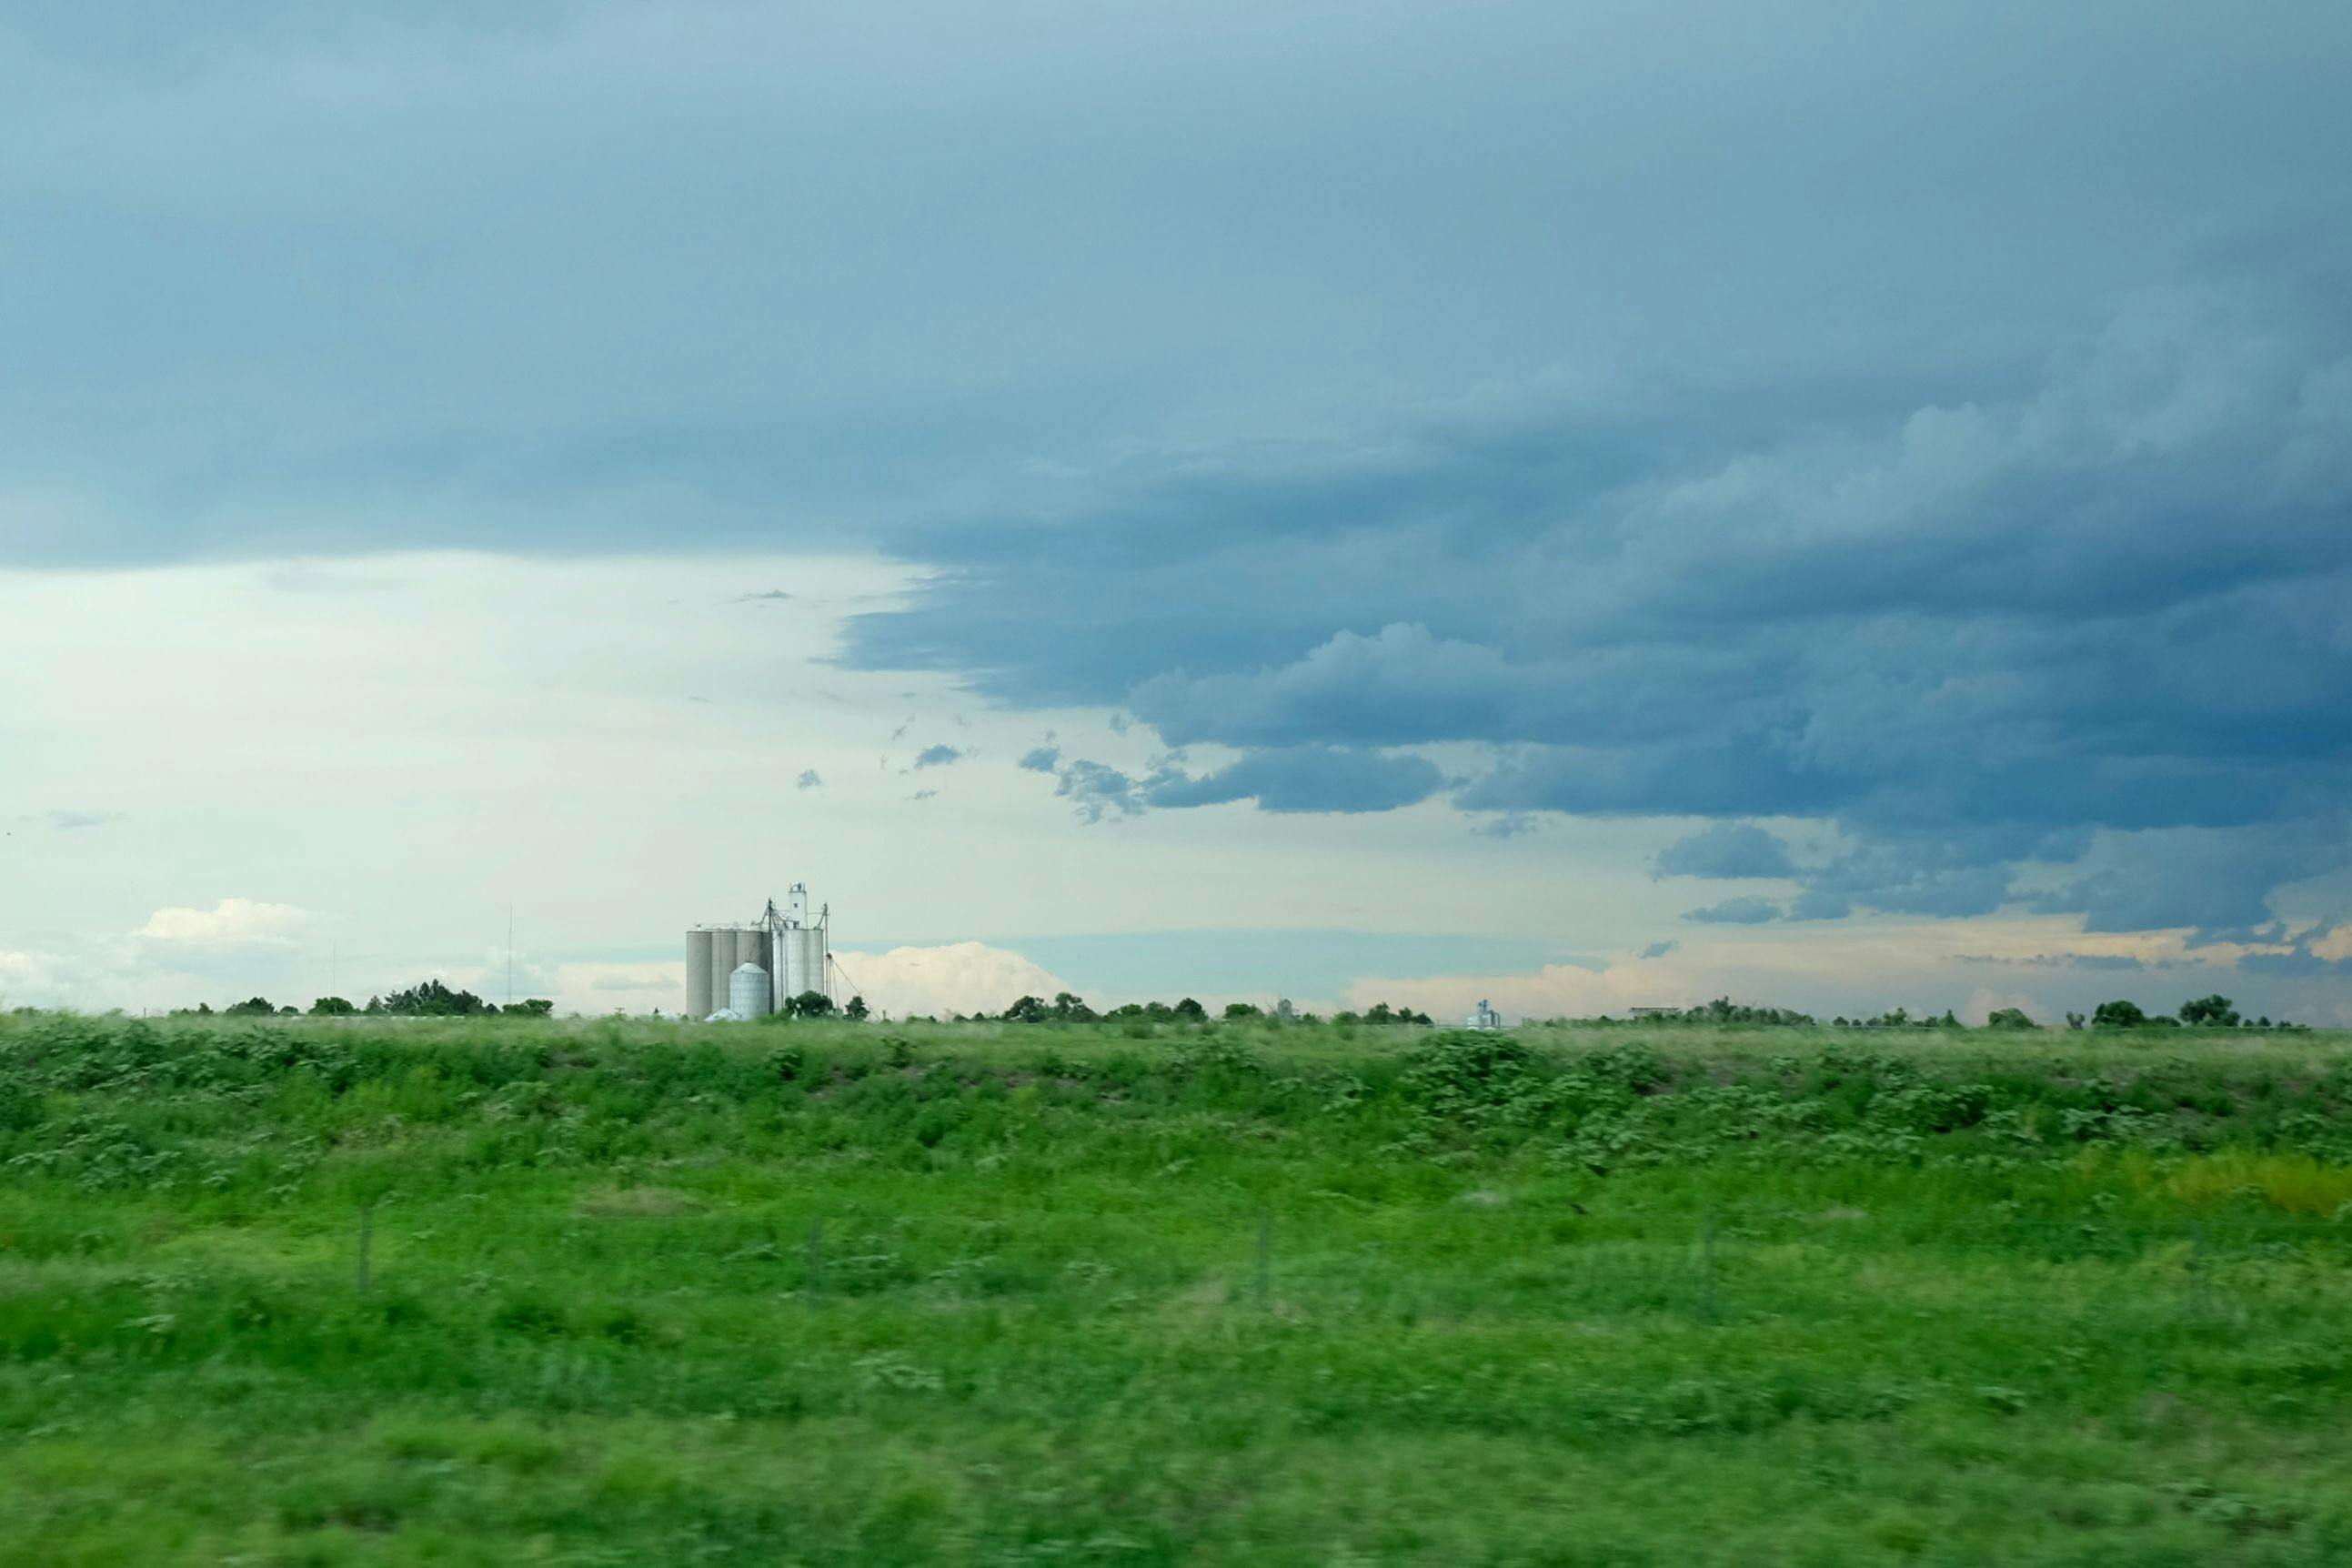 A lush green landscape with a grain silo in the distance, framed by gathering storm clouds.